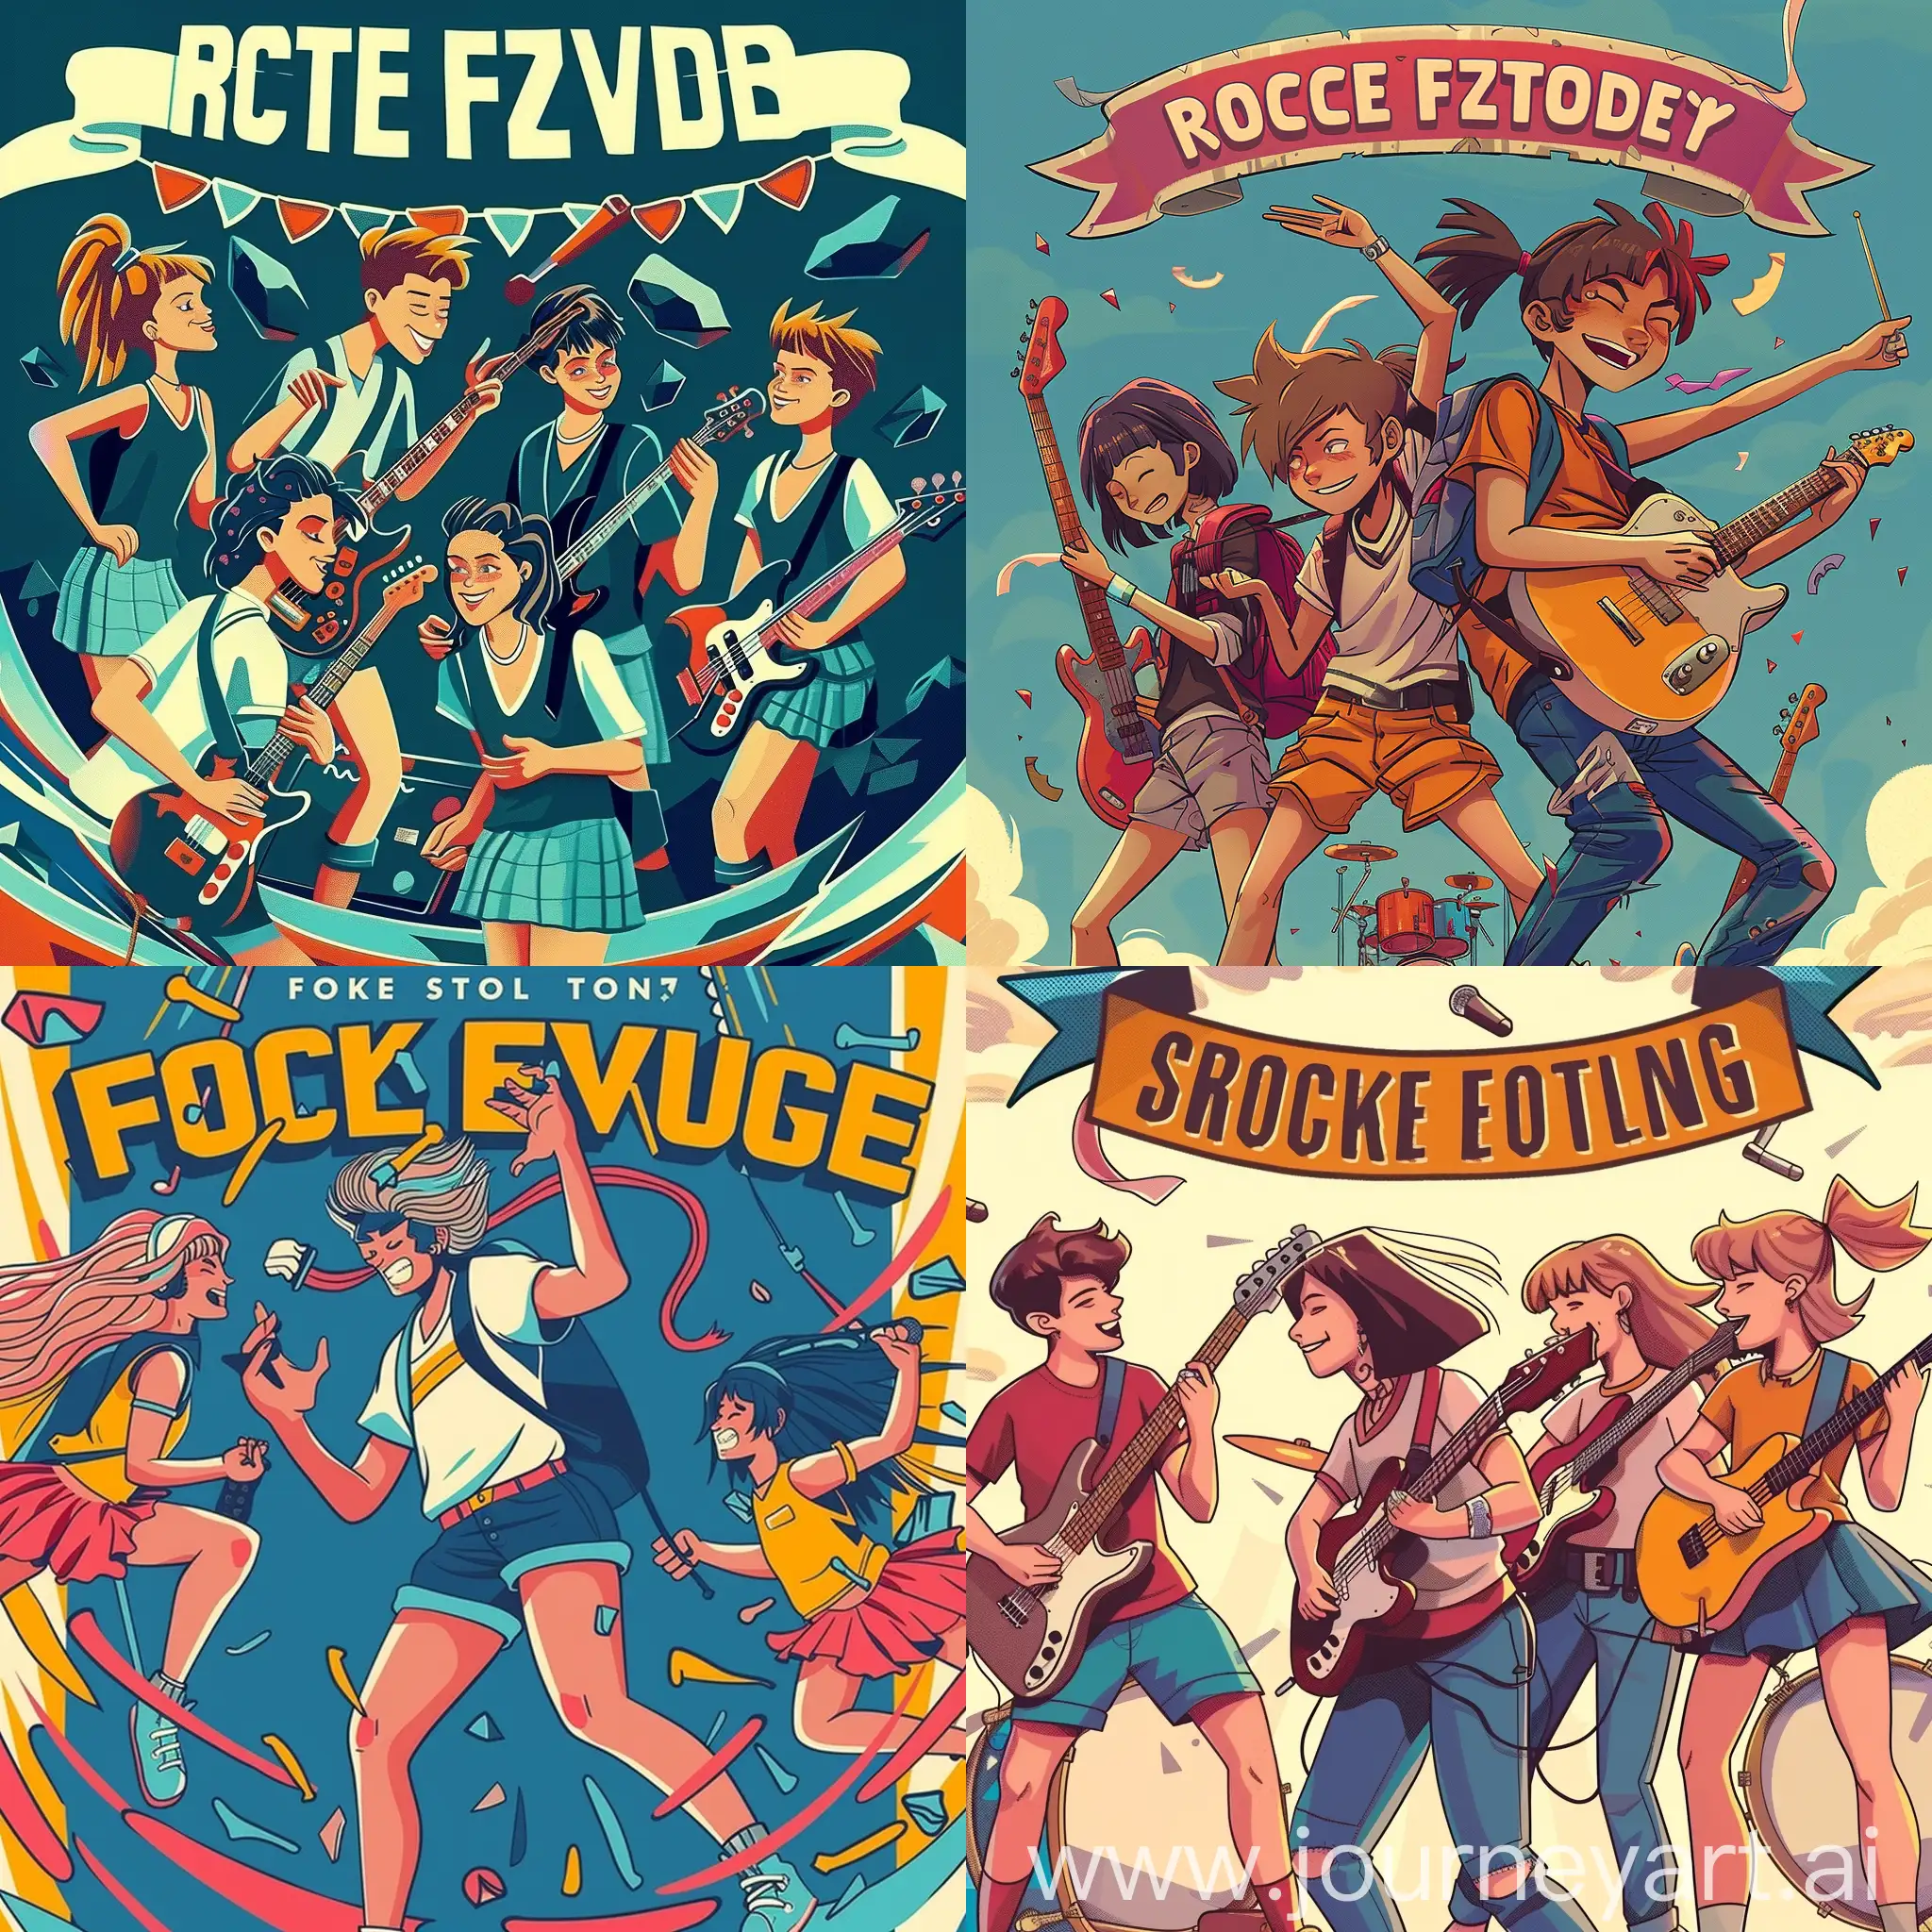 Create a poster for rock-festival, which has only school bands performing. 